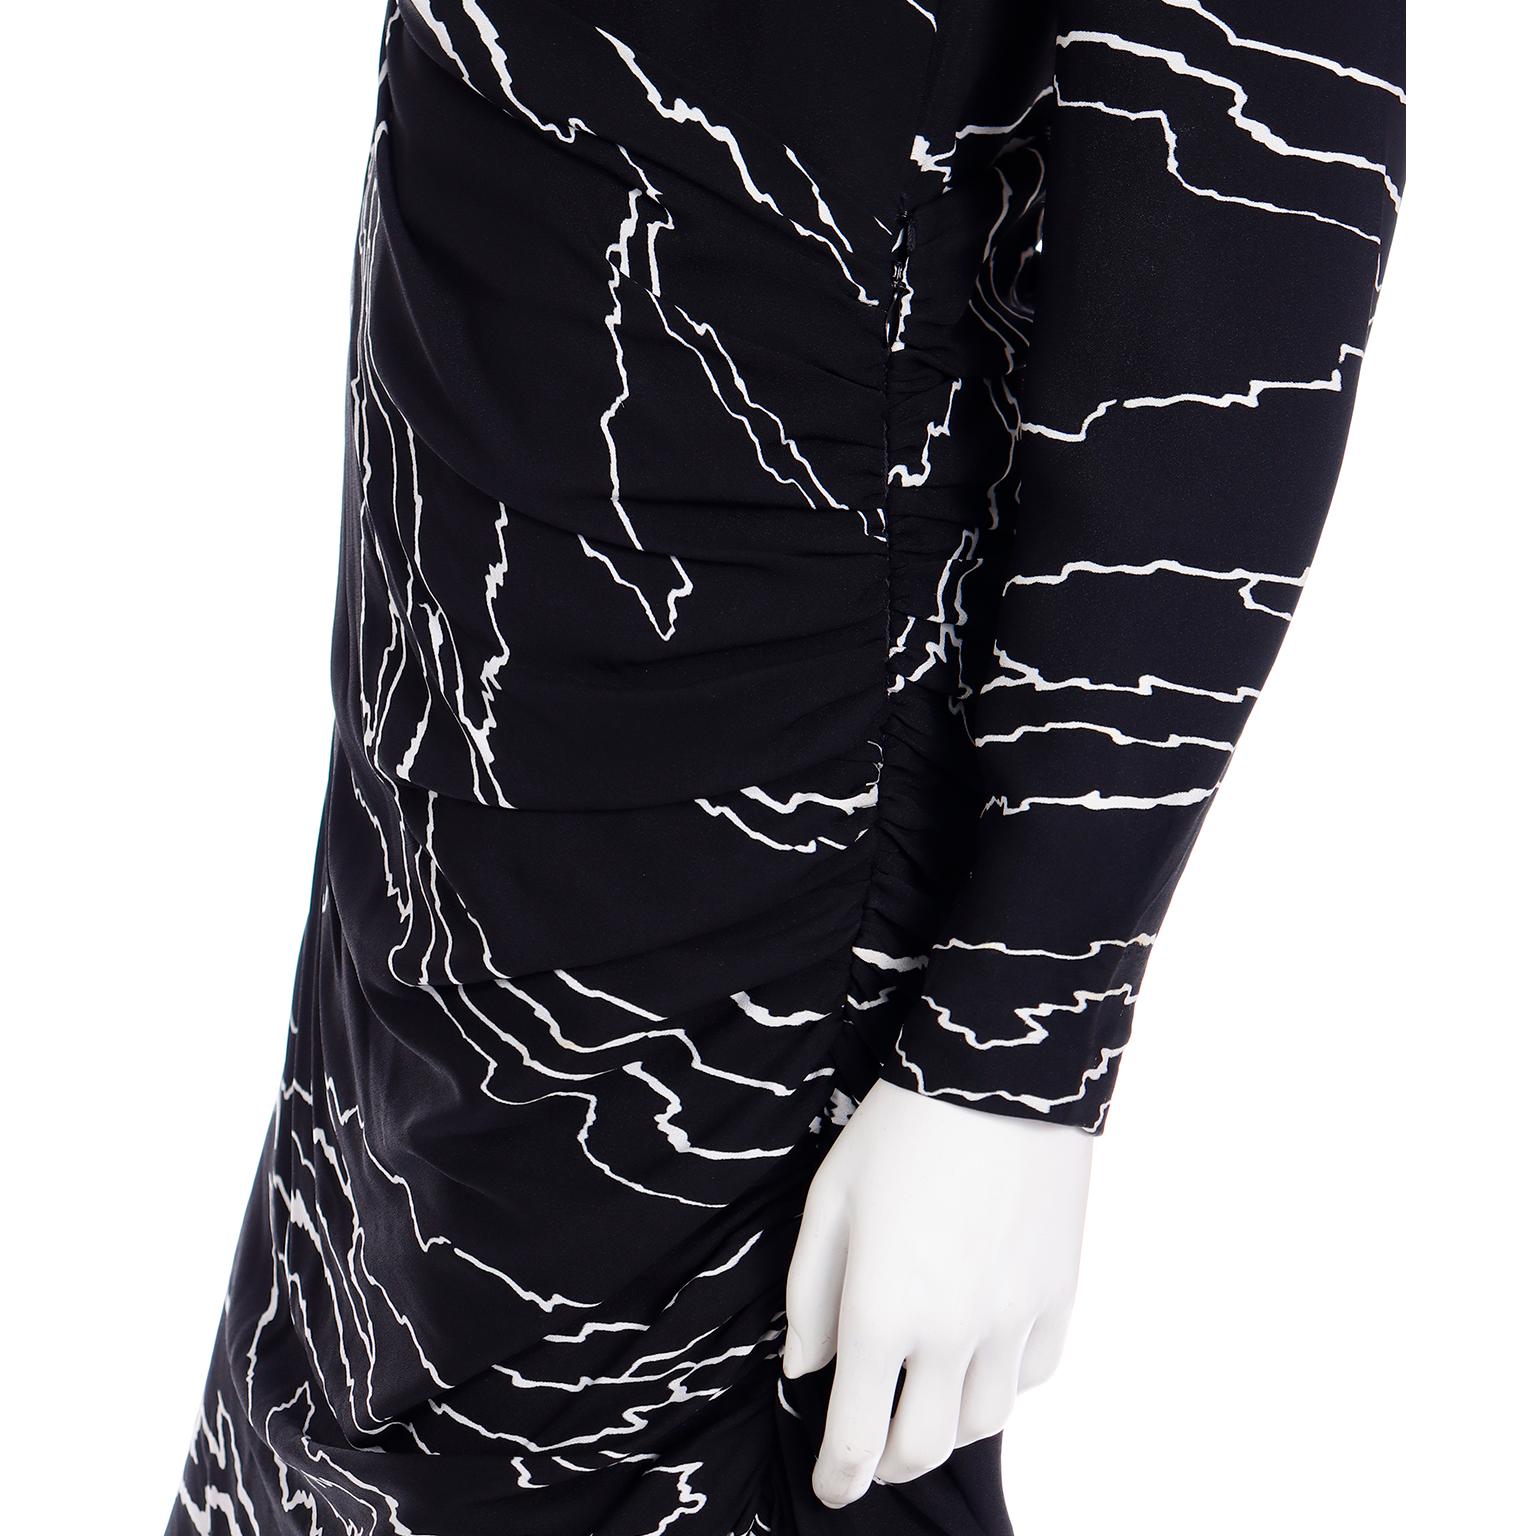 1985 Bill Blass Vintage Runway Dress Abstract Black White Evening Gown Draping For Sale 11